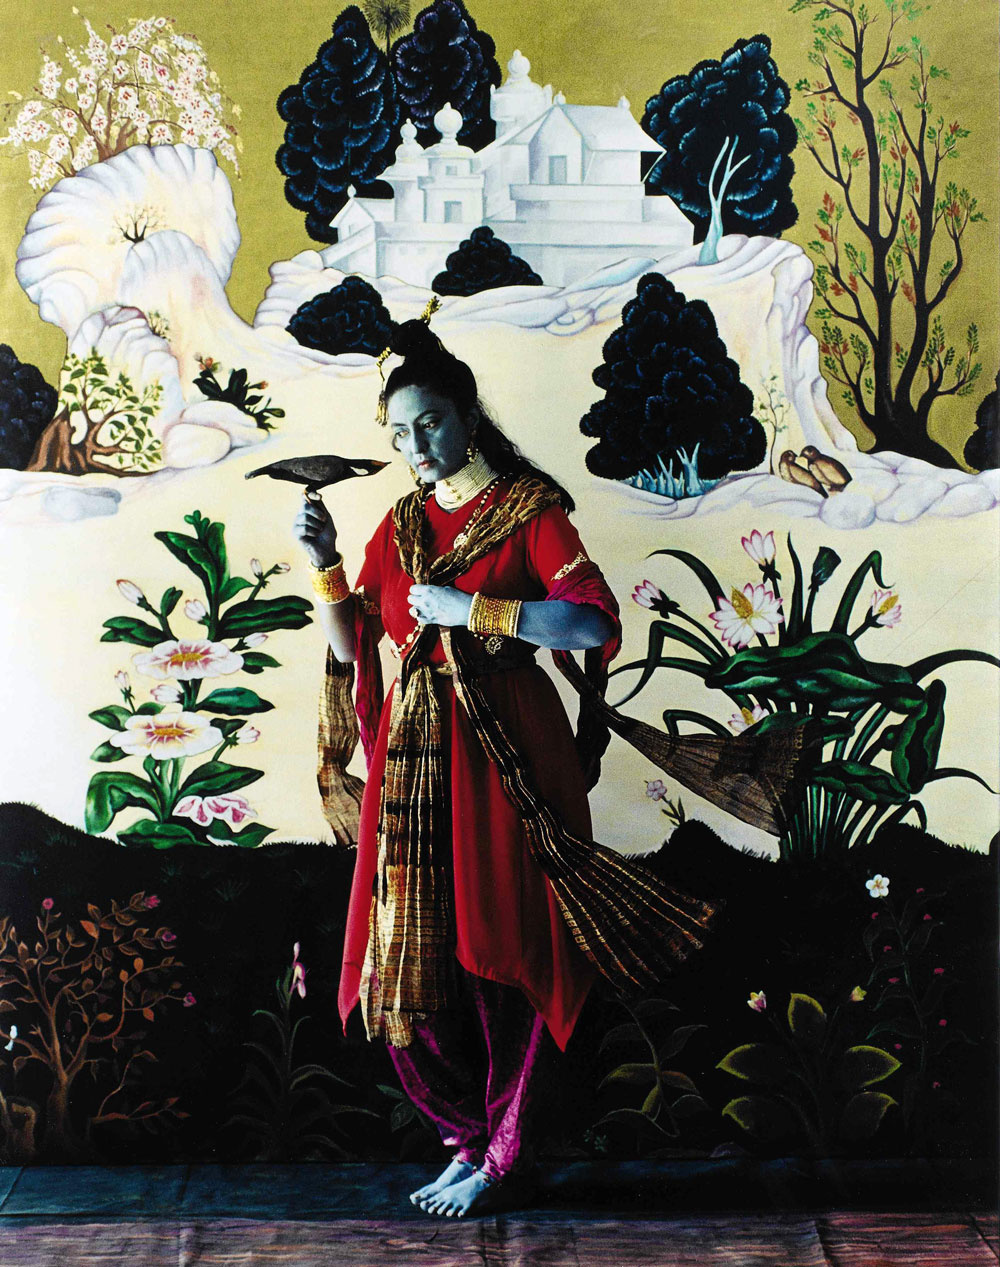 A painting with plants, flowers, and trees leads to a simple white temple with a yellow background. Against this is a photo a strong Indian woman with blue skin dressed in a traditional red sari. She holds a black bird in her right hand, staring at it as the bird stares back.